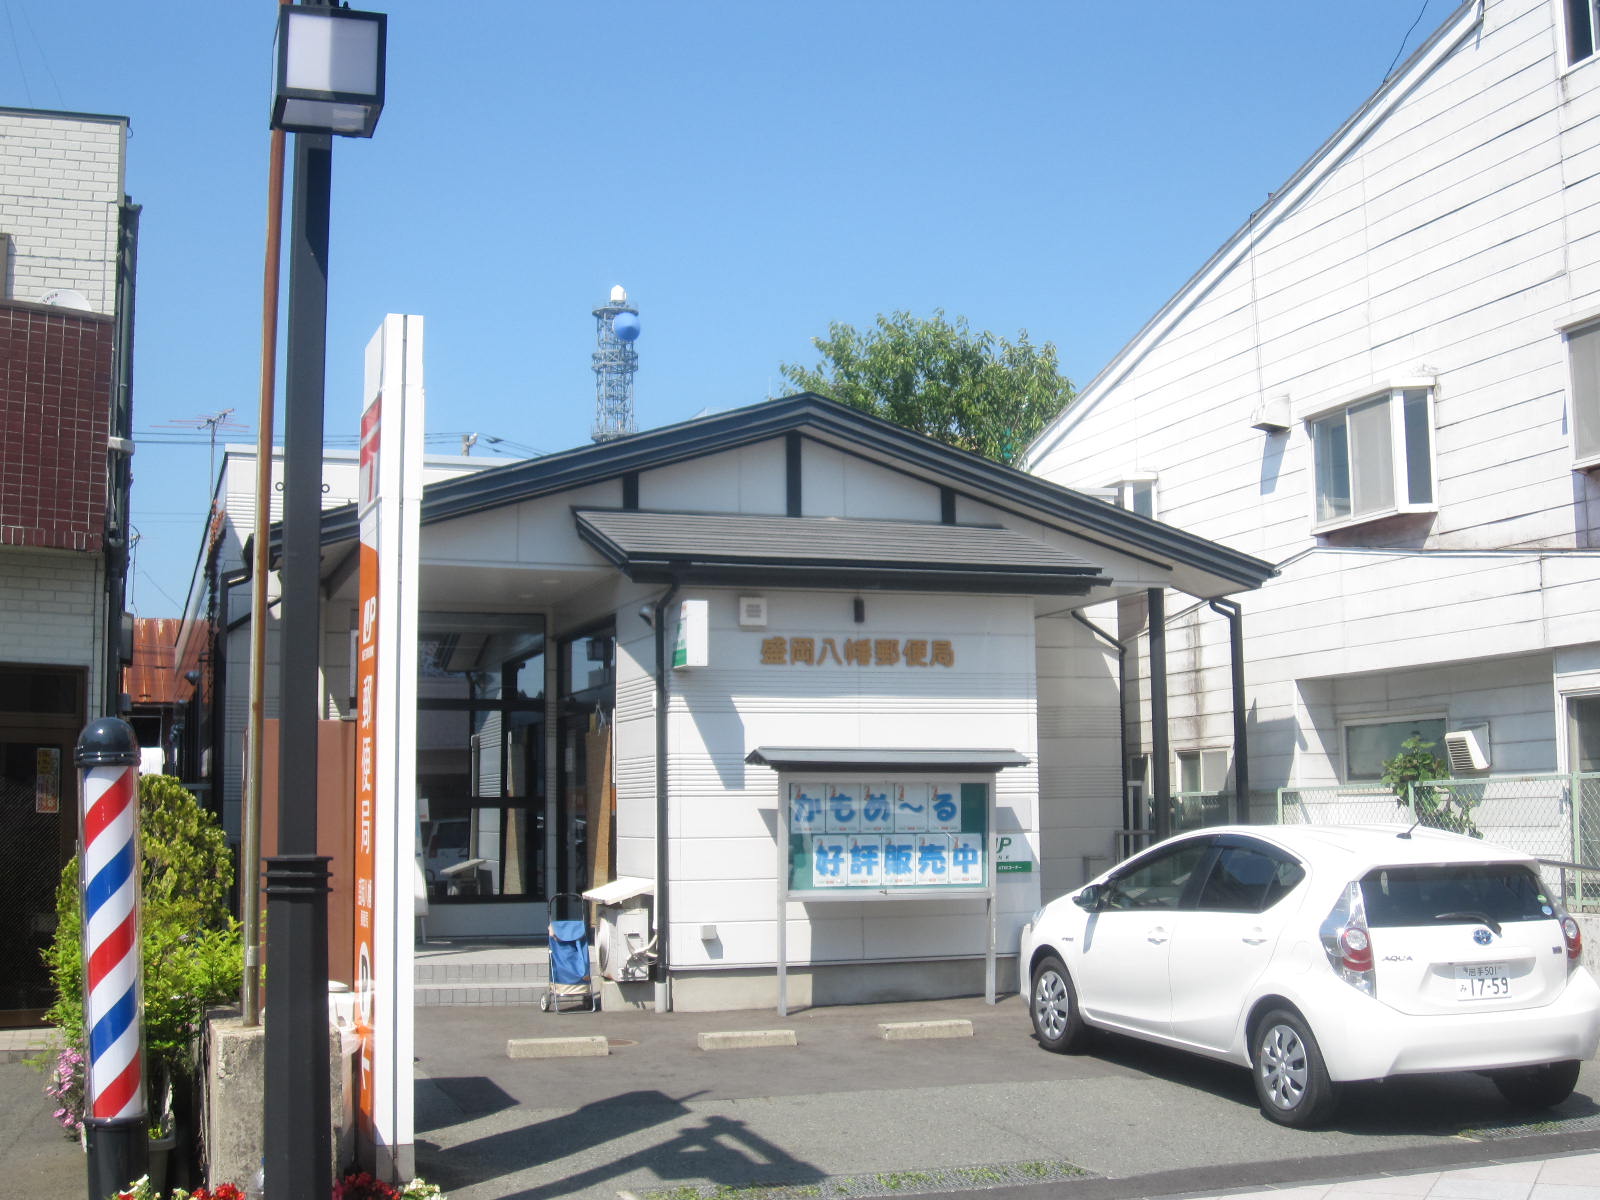 post office. 562m to Morioka Hachiman post office (post office)